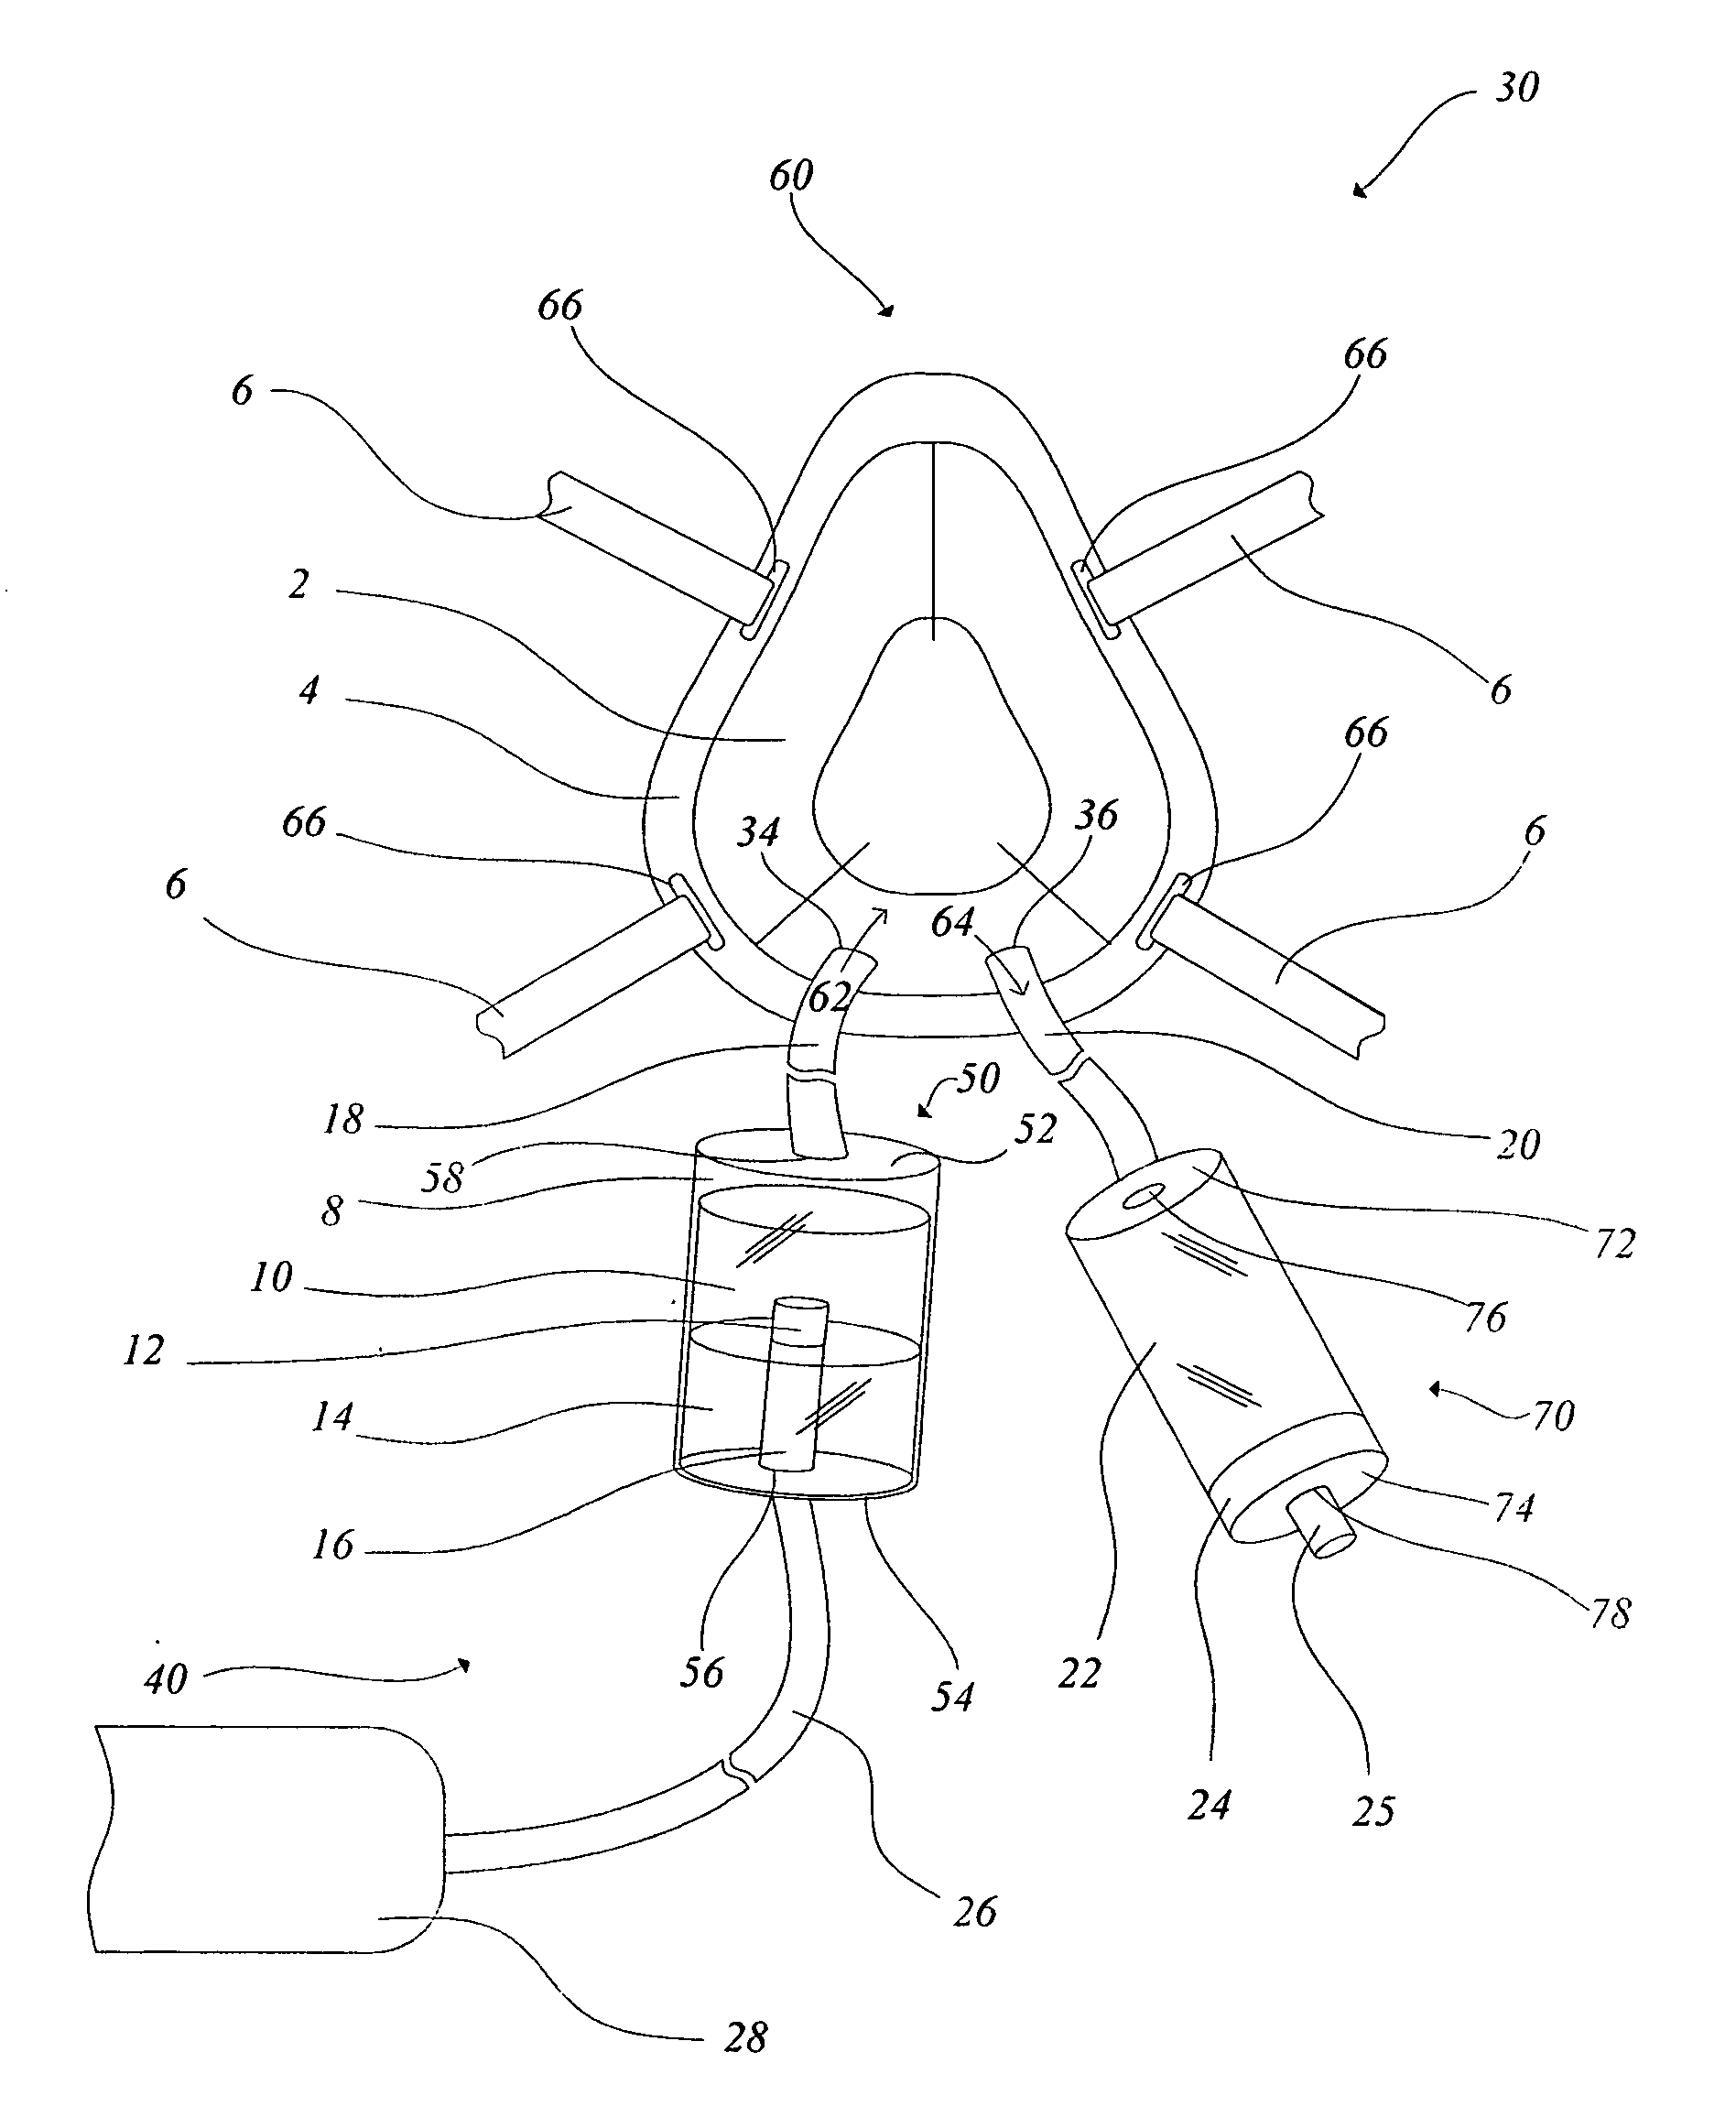 Systems and methods for the administration of drugs and medications